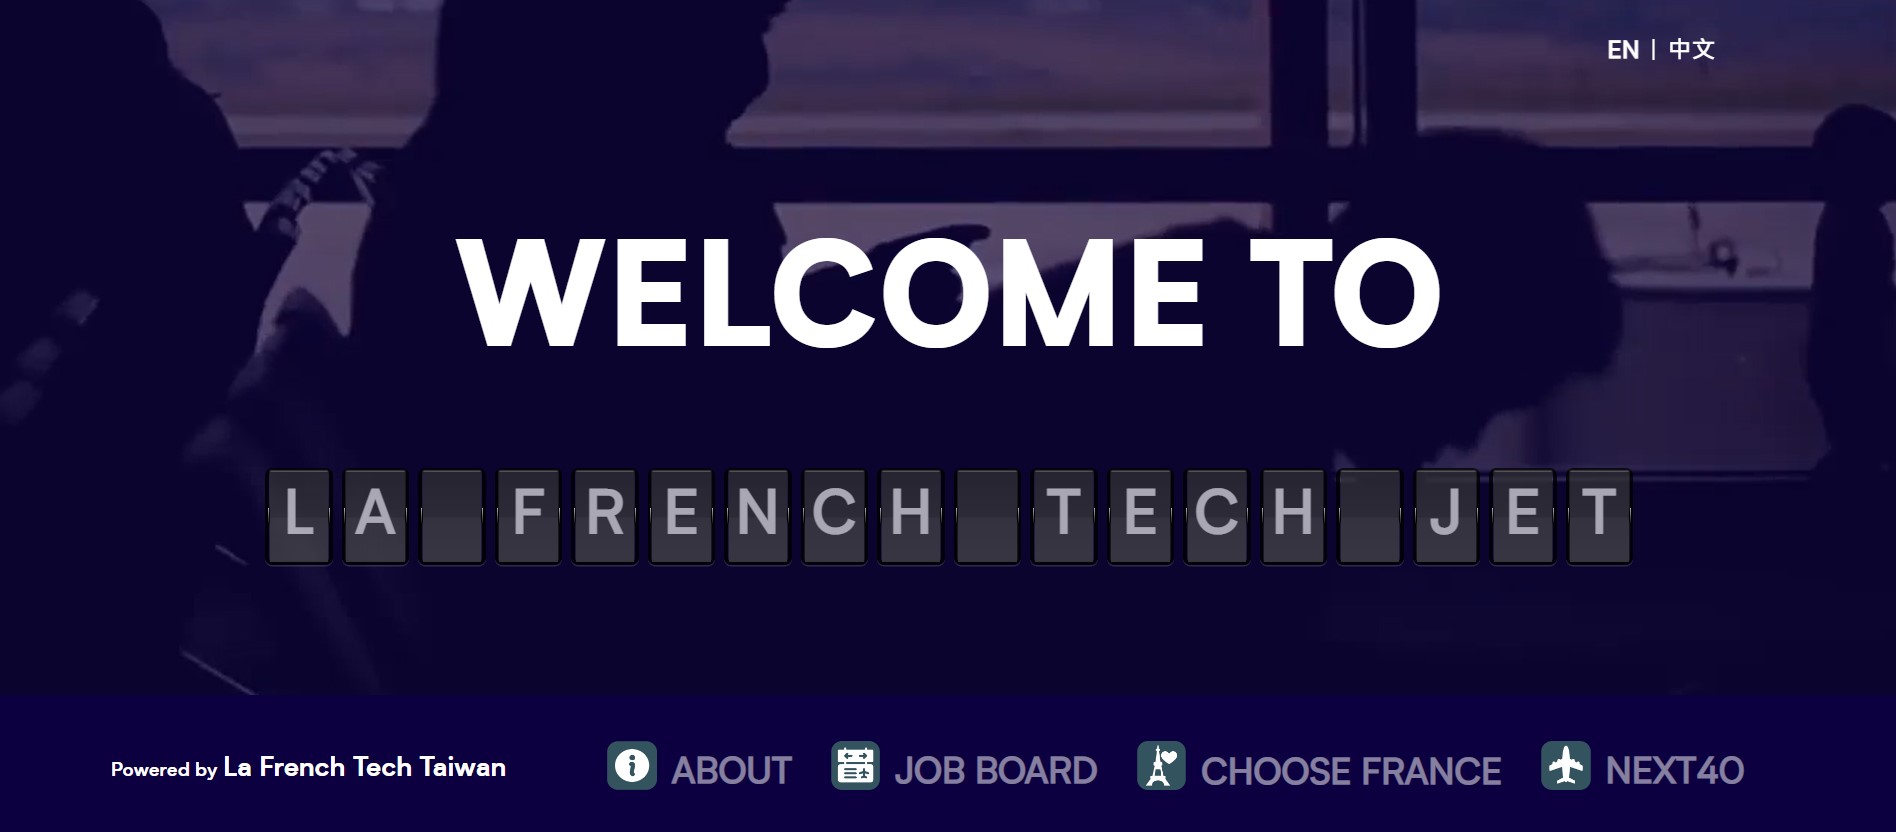 Presenting the French Tech Job Board